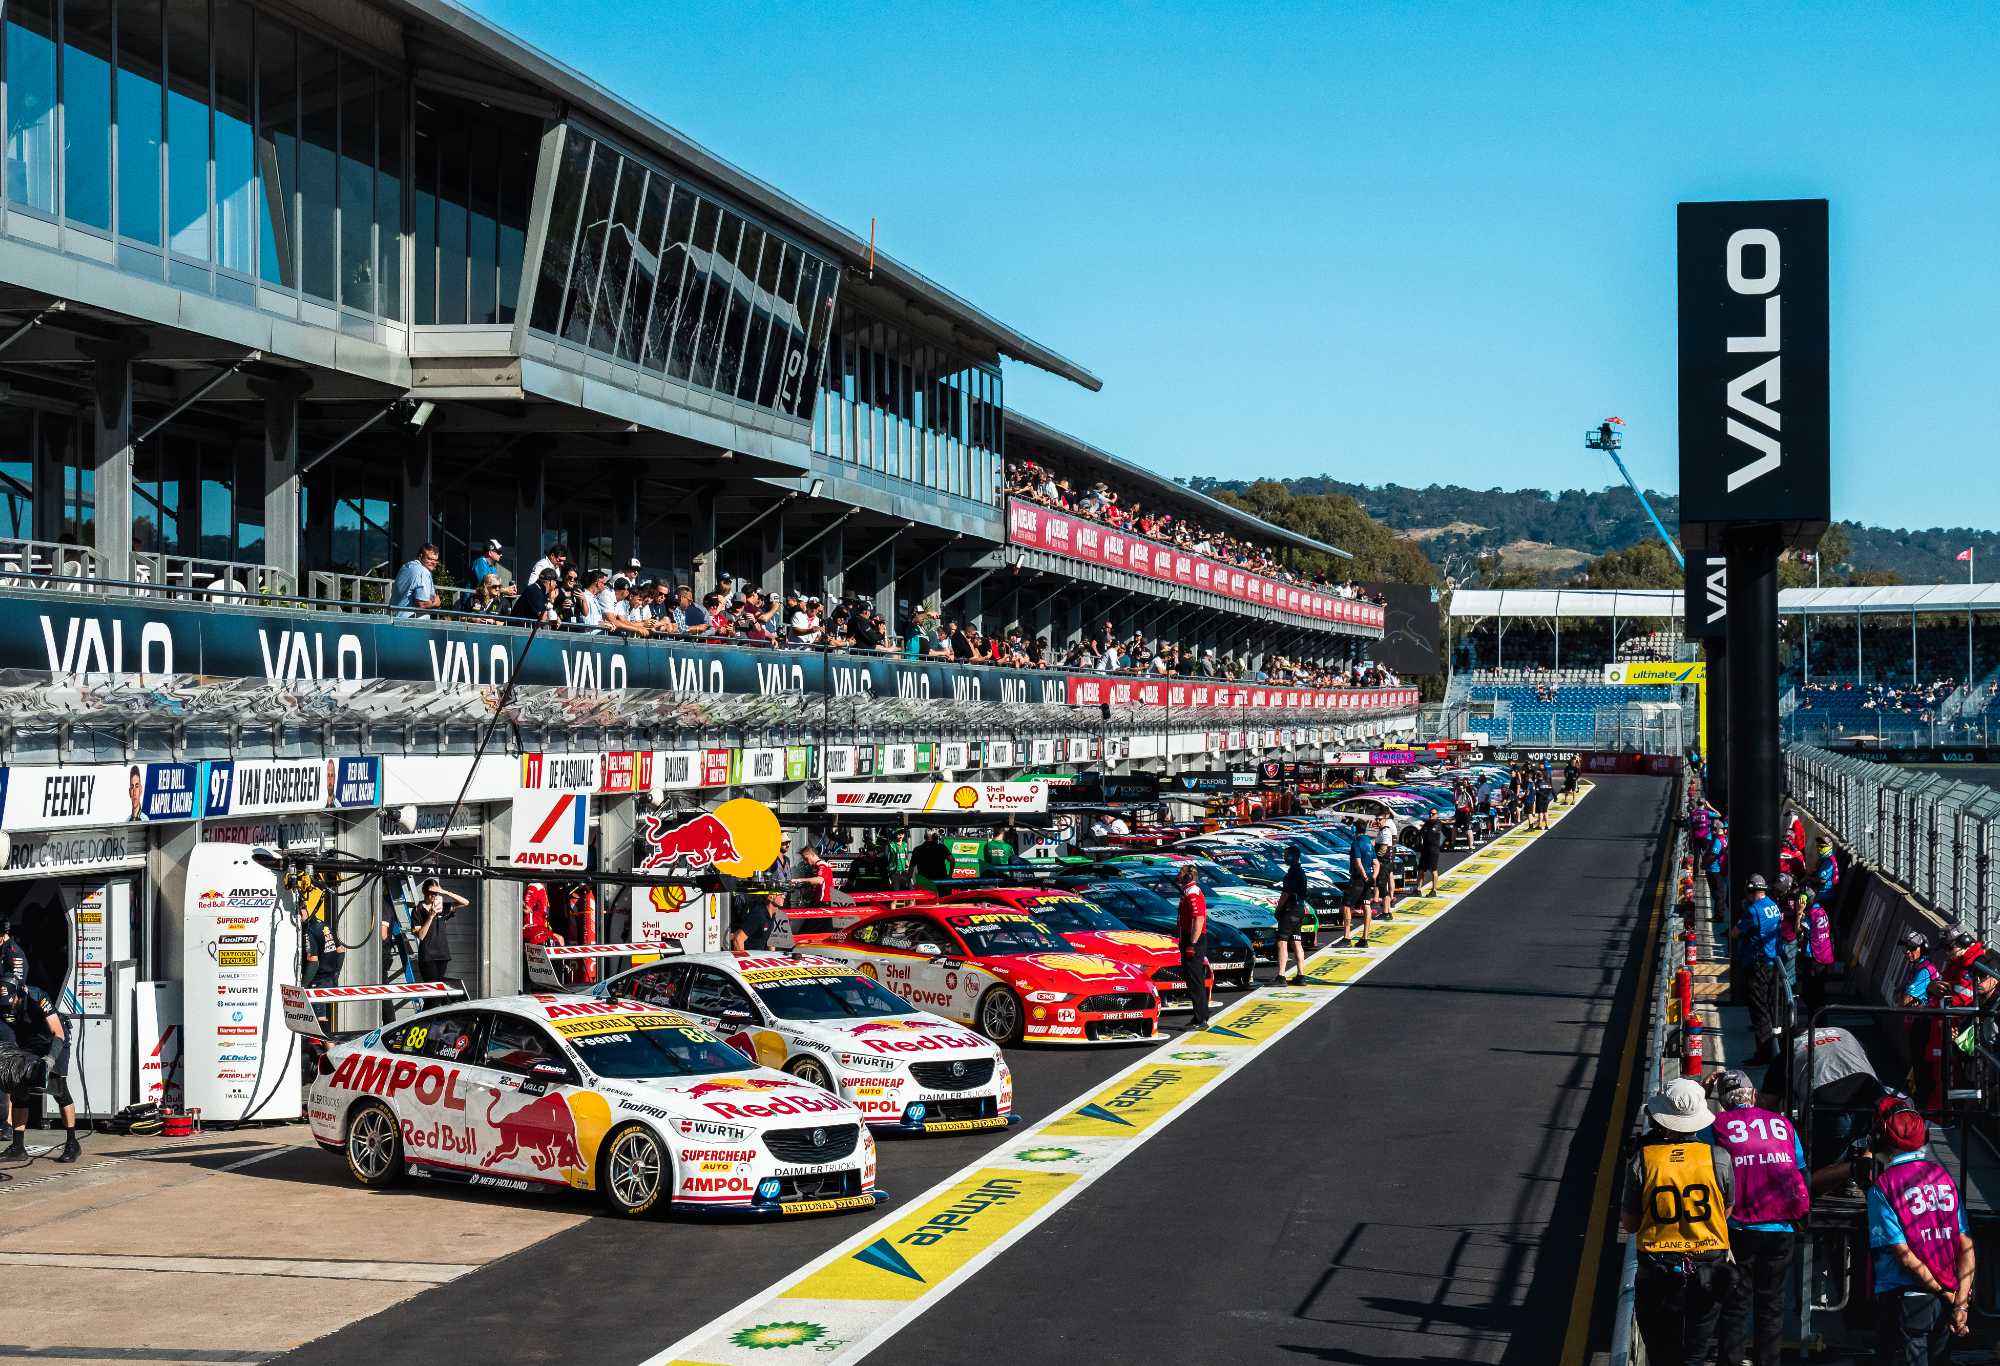 Drivers line up during qualifying for the Adelaide 500, which is part of the 2022 Supercars Championship Season at Adelaide Parklands Circuit on December 02, 2022 in Adelaide, Australia. (Photo by Daniel Kalisz/Getty Images)